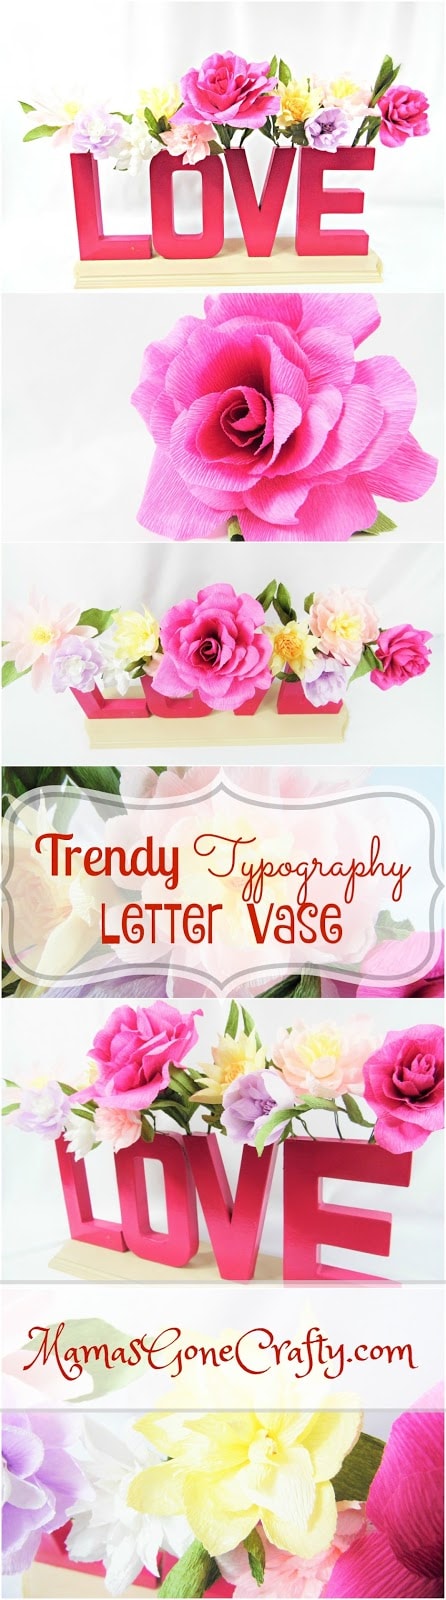 A series of images of a DIY typography craft. The finished project is red letters on a wooden base that read "love," with crepe paper flowers in many varieties growing out of the letters. A pink rose made of crepe paper is under the craft, as are images of the craft from different angles. The words on the graphic read "Trendy Typography Letter Vase" and "MamasGoneCrafty.com."